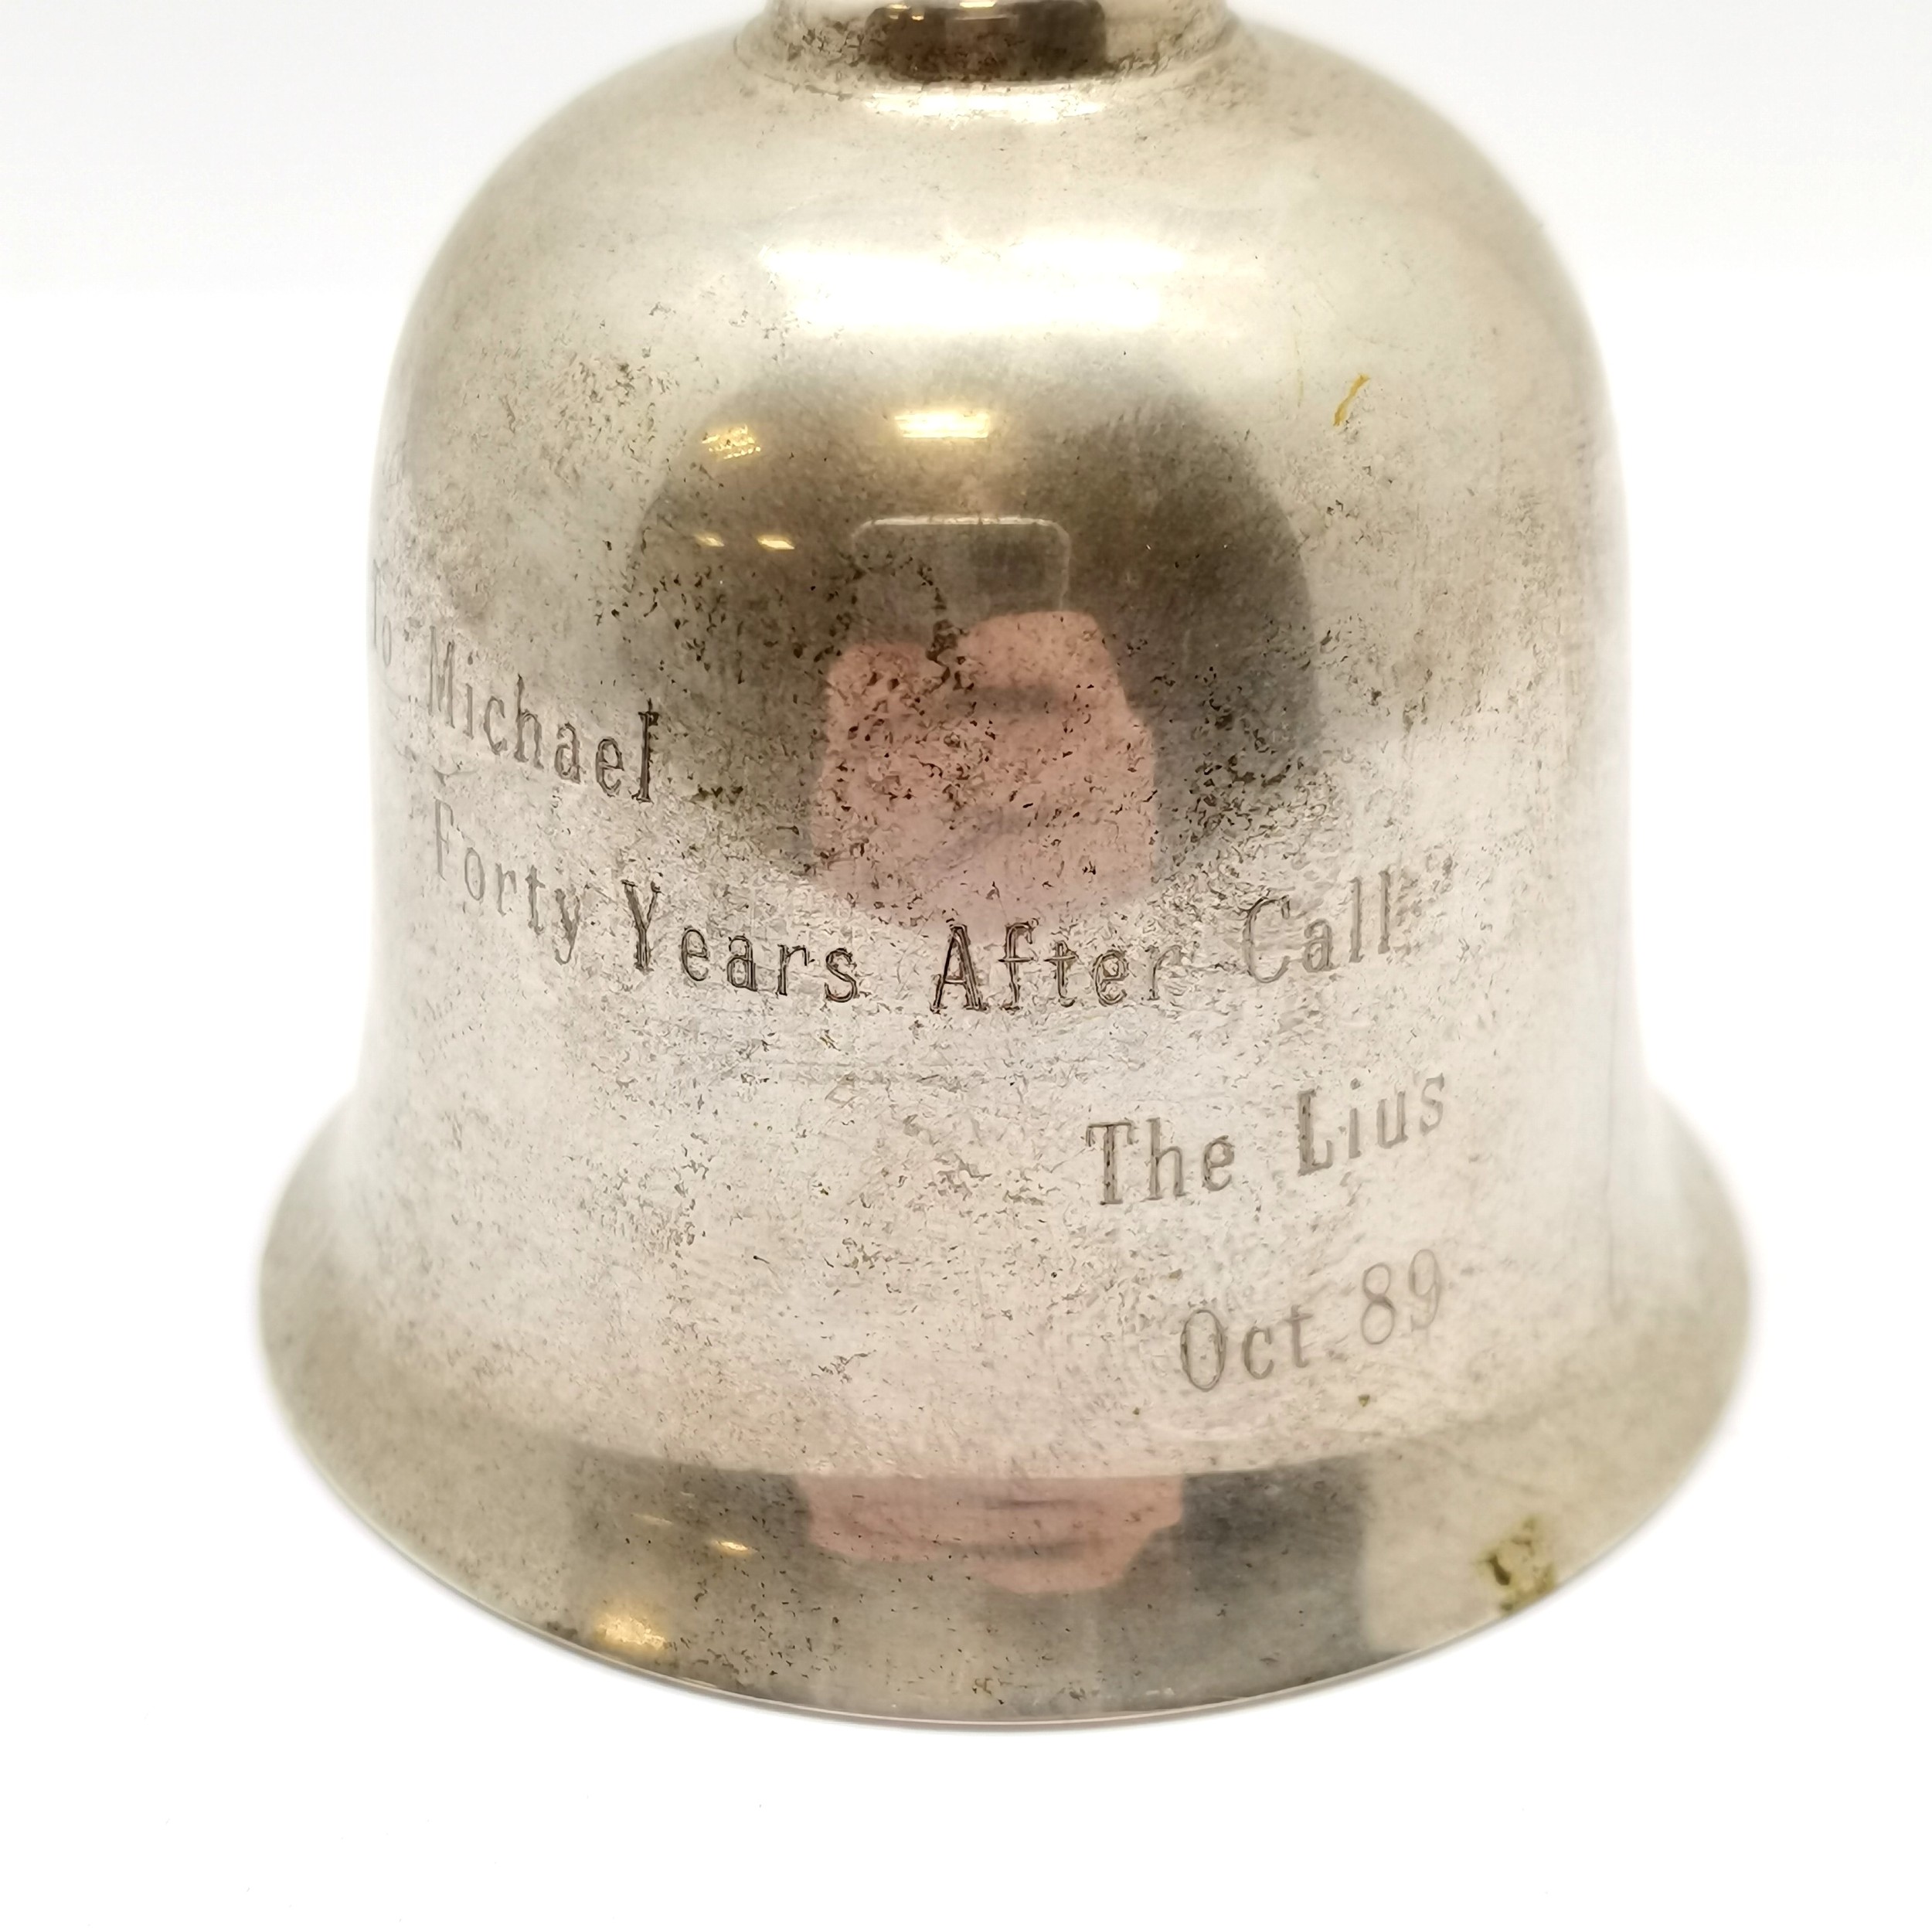 Italian hallmarked bell with dedication (October 1989) ~ 11cm high & 60g - some surface tarnish - Image 3 of 4